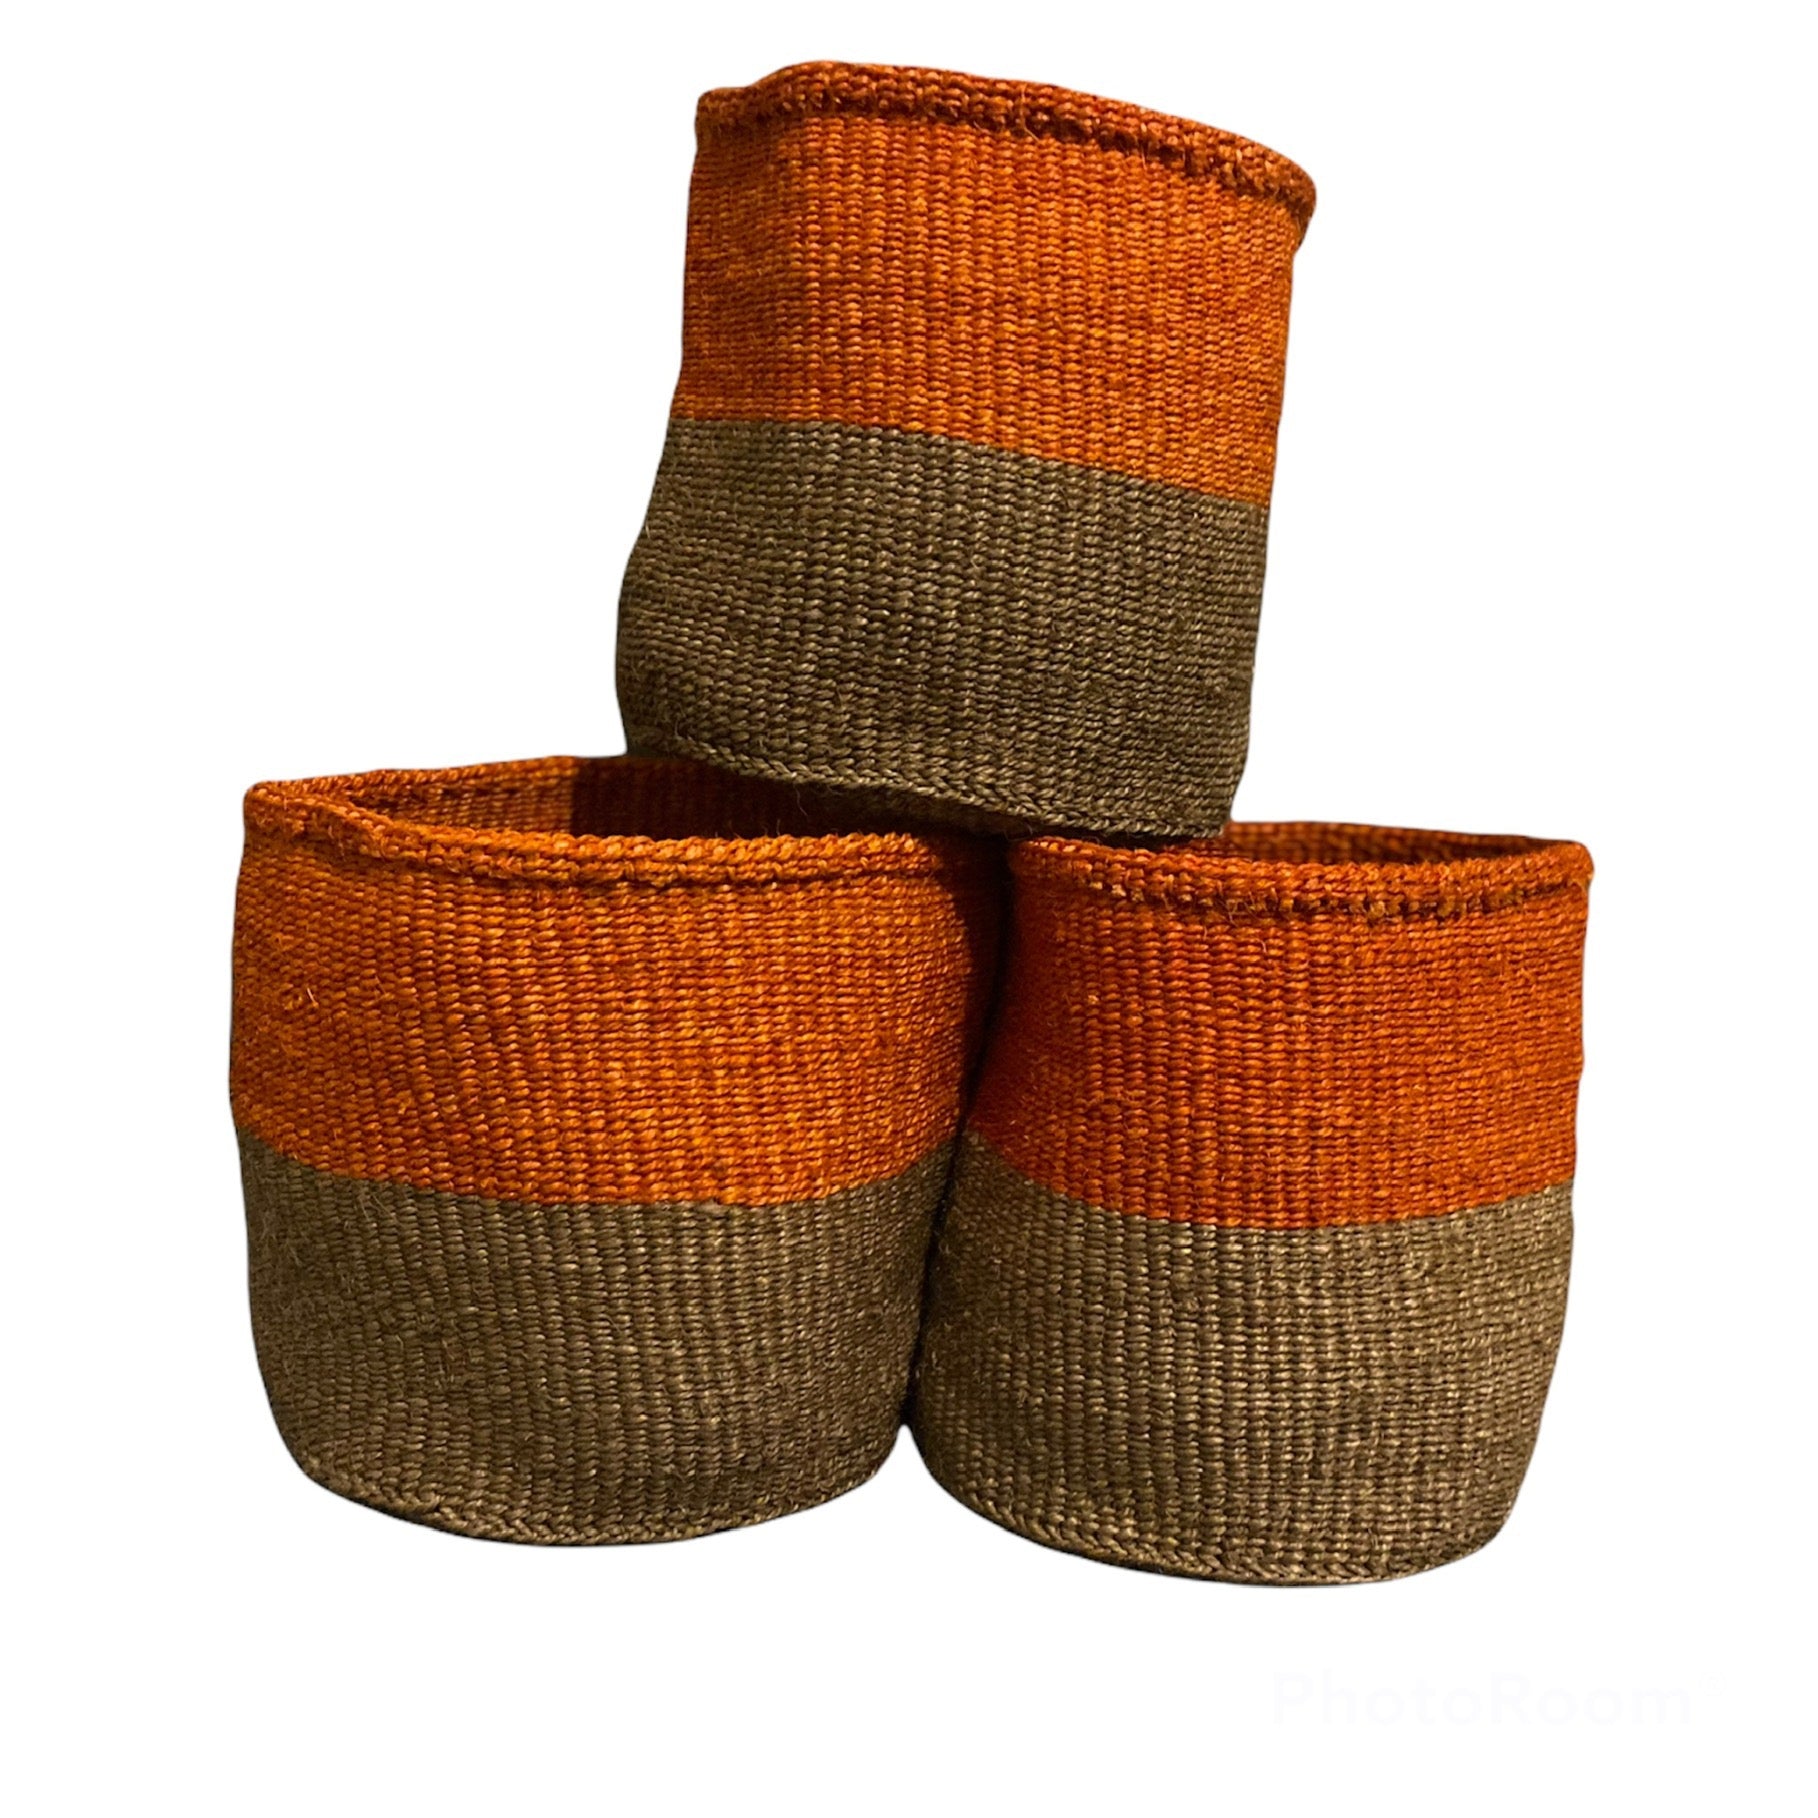 DECORATIVE STORAGE BASKET  African Handwoven Sisal Basket for toys and Home Decor 9”x9” Set of 3 - Tobmarc Home Decor & Gifts 